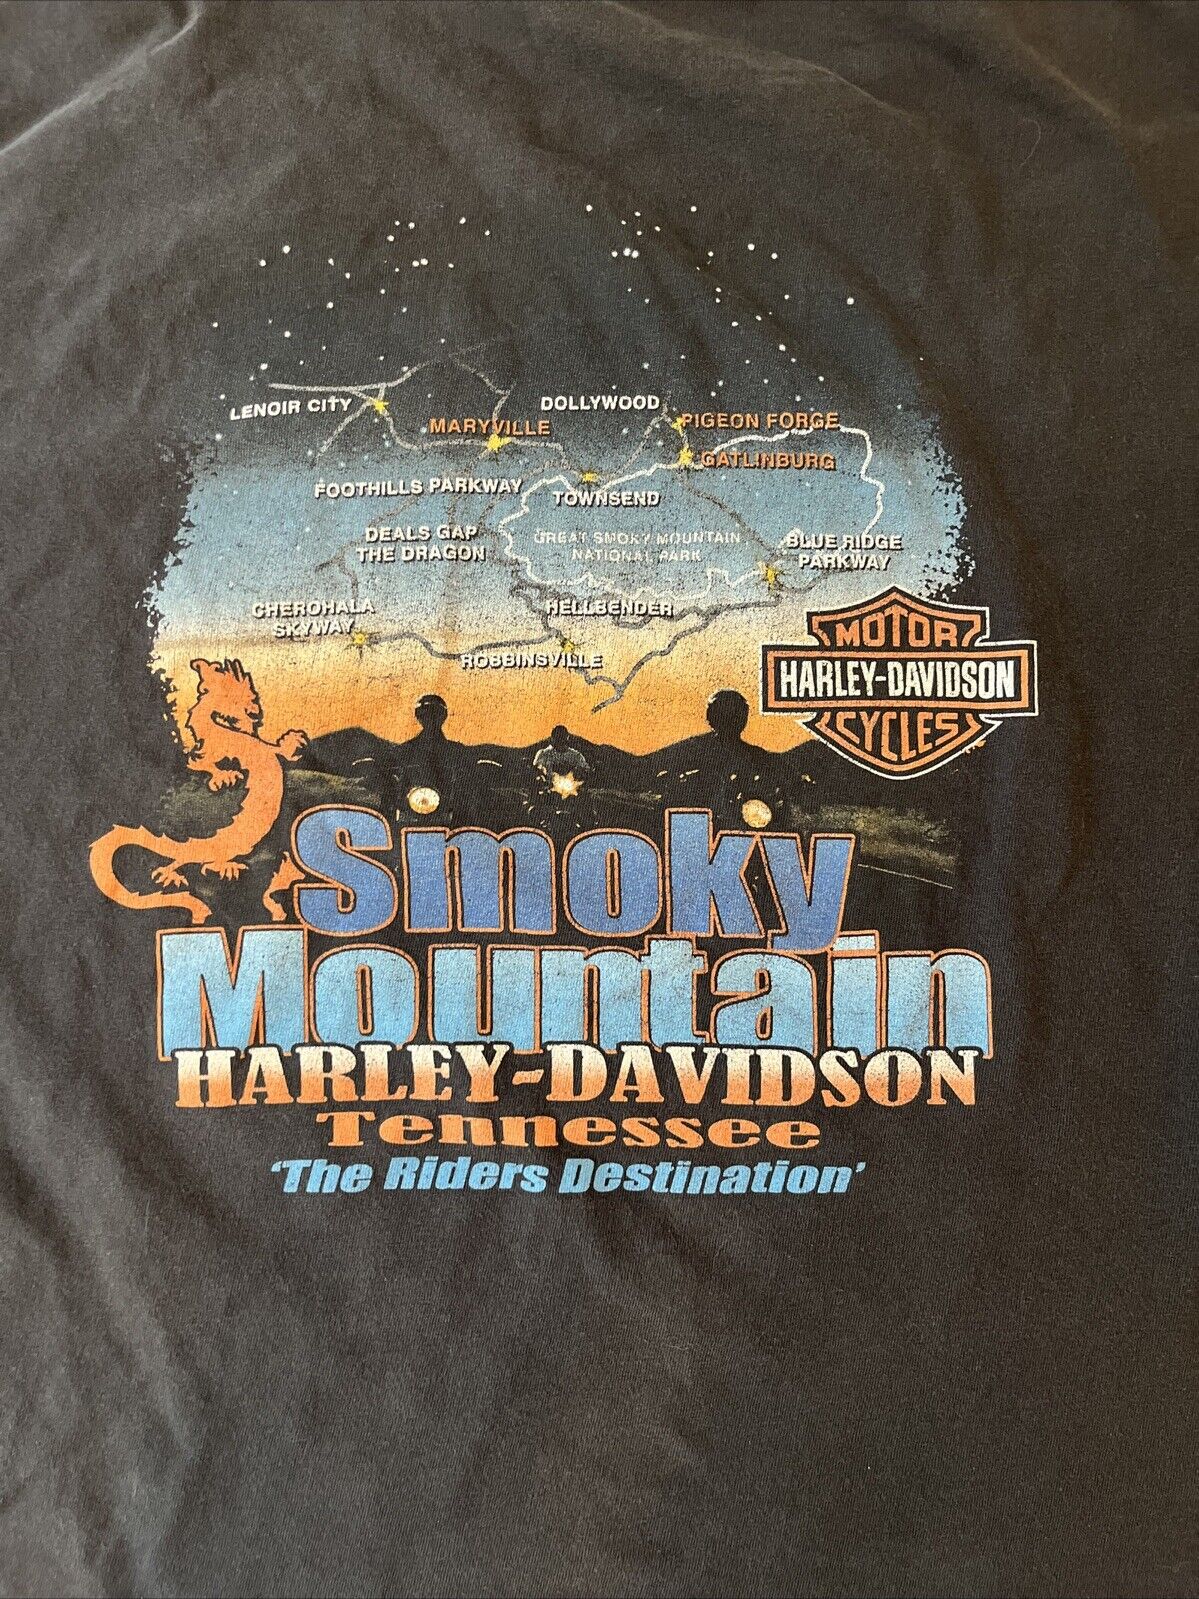 2009 Harley Davidson Smoky Mountains Tennessee Graphic T-shirt - Men’s Size XL